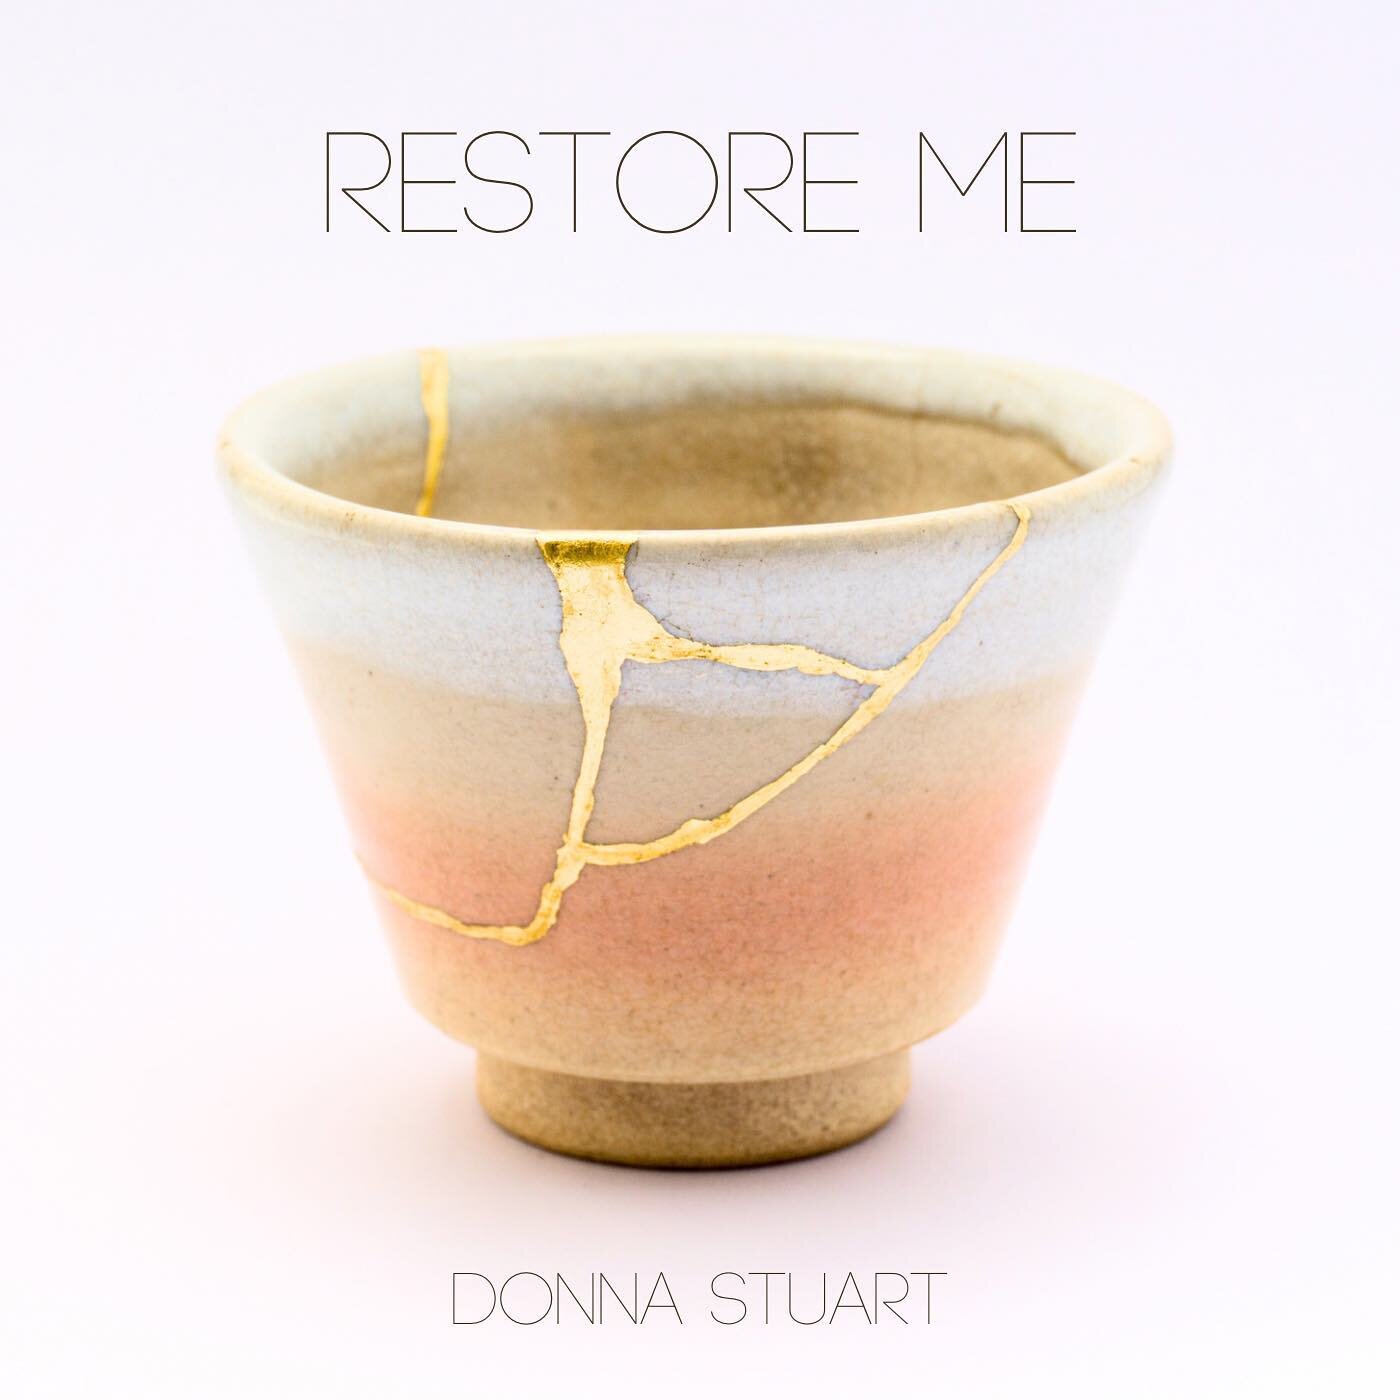 RESTORE ME

What a joy to get to team up with friends who believe so much in RESTORATION! 

I wrote the lyrics to Restore Me in February 2019 as a prayer of remembrance when God lovingly restored me as a 22 year old worship leader after having led a 